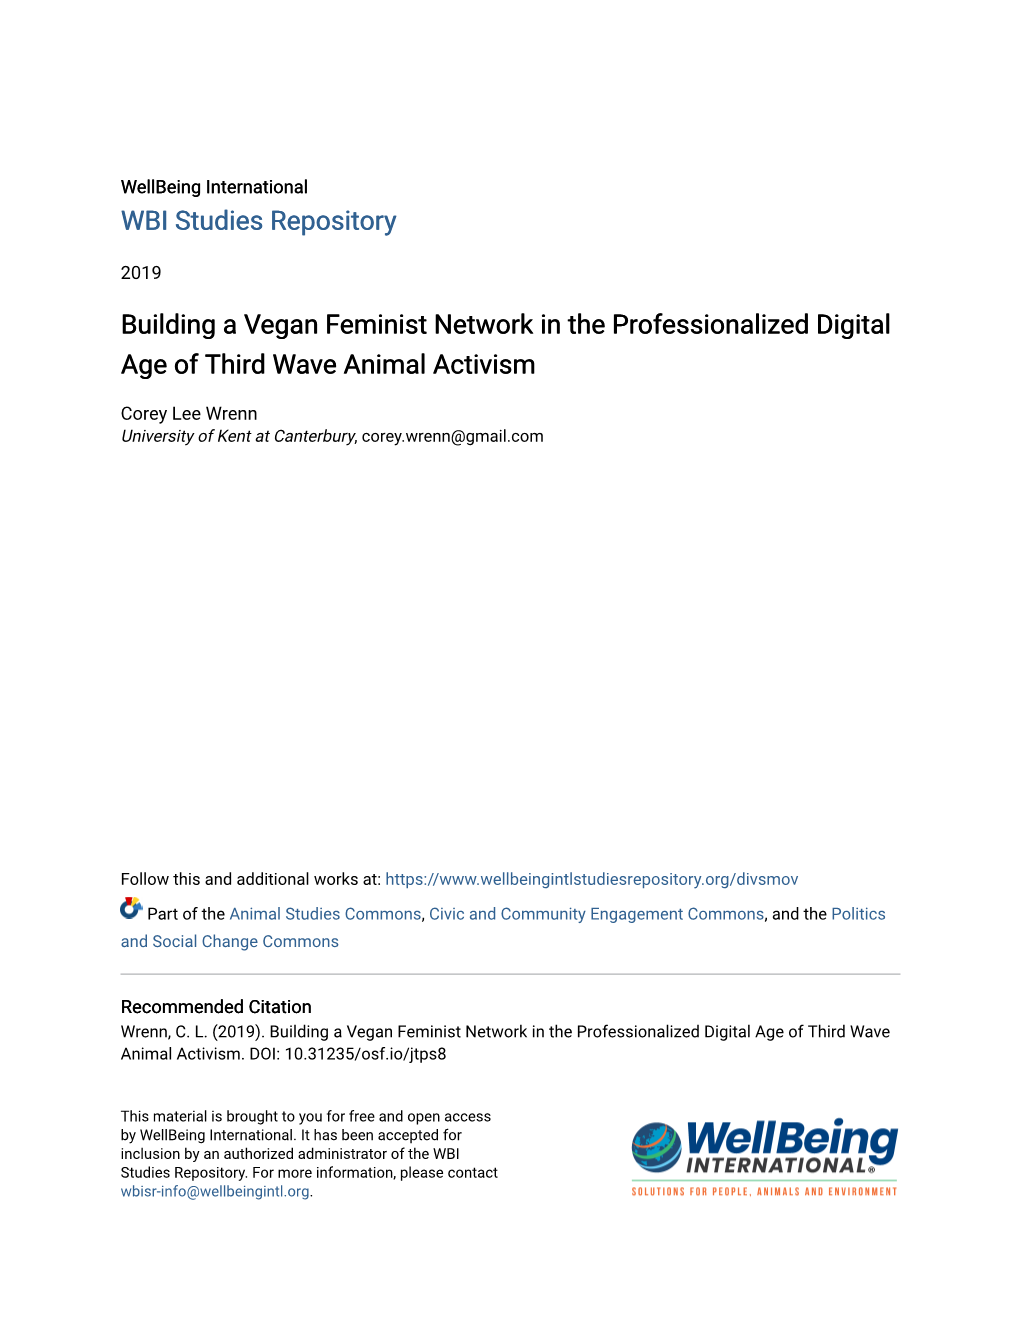 Building a Vegan Feminist Network in the Professionalized Digital Age of Third Wave Animal Activism